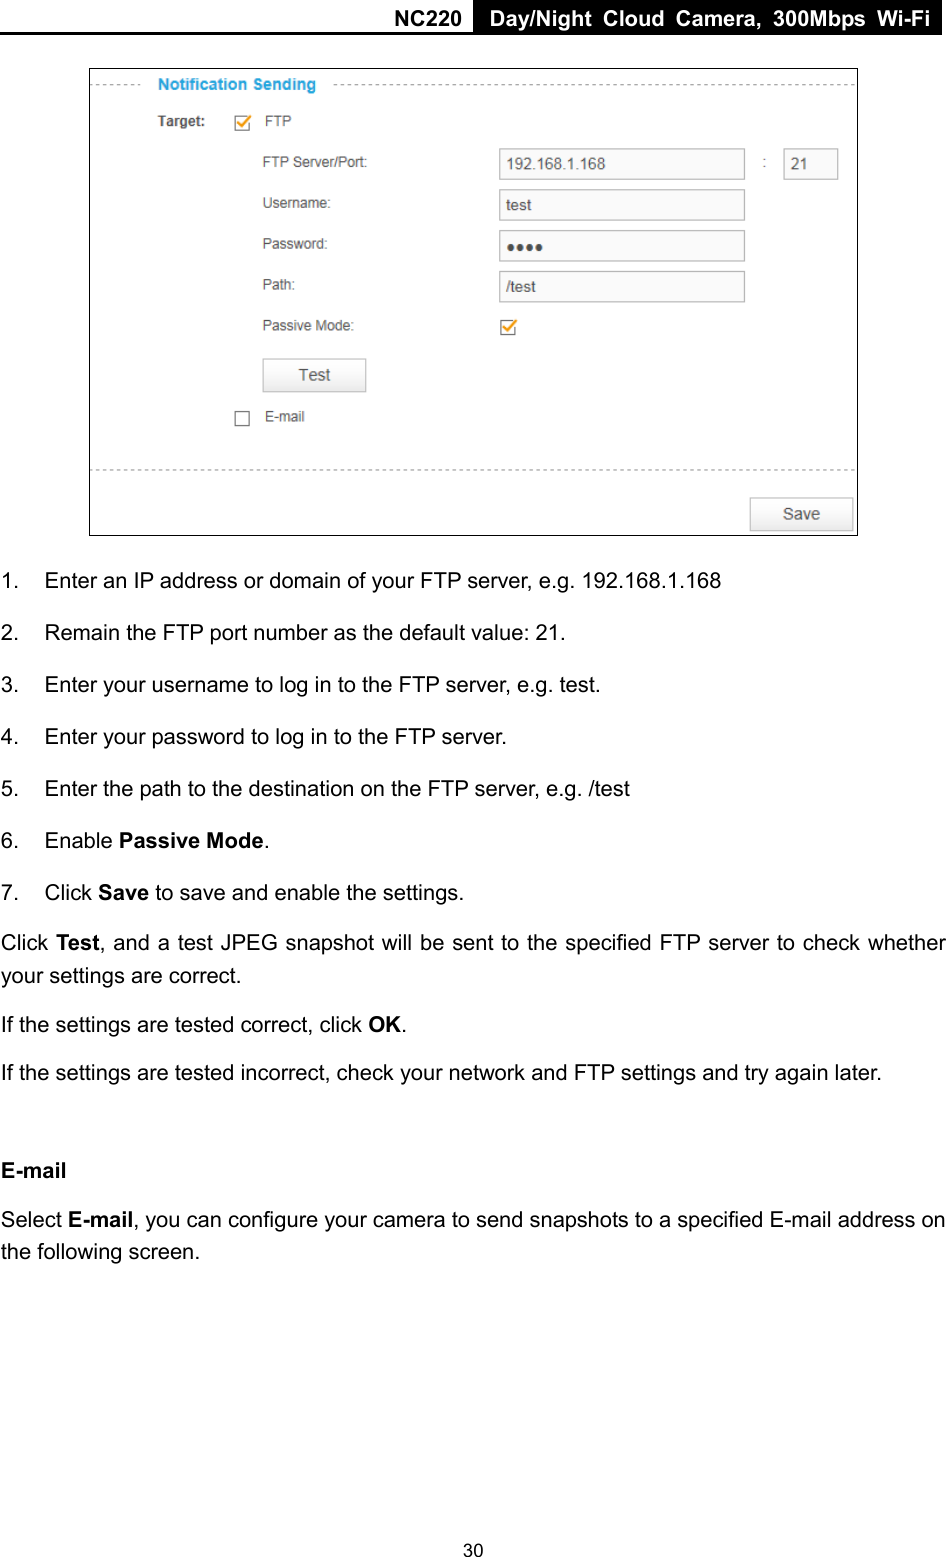 NC220 Day/Night Cloud Camera, 300Mbps Wi-Fi   1. Enter an IP address or domain of your FTP server, e.g. 192.168.1.168 2. Remain the FTP port number as the default value: 21. 3. Enter your username to log in to the FTP server, e.g. test. 4.  Enter your password to log in to the FTP server. 5. Enter the path to the destination on the FTP server, e.g. /test 6. Enable Passive Mode. 7.  Click Save to save and enable the settings. Click Test, and a test JPEG snapshot will be sent to the specified FTP server to check whether your settings are correct. If the settings are tested correct, click OK. If the settings are tested incorrect, check your network and FTP settings and try again later.  E-mail Select E-mail, you can configure your camera to send snapshots to a specified E-mail address on the following screen.   30 